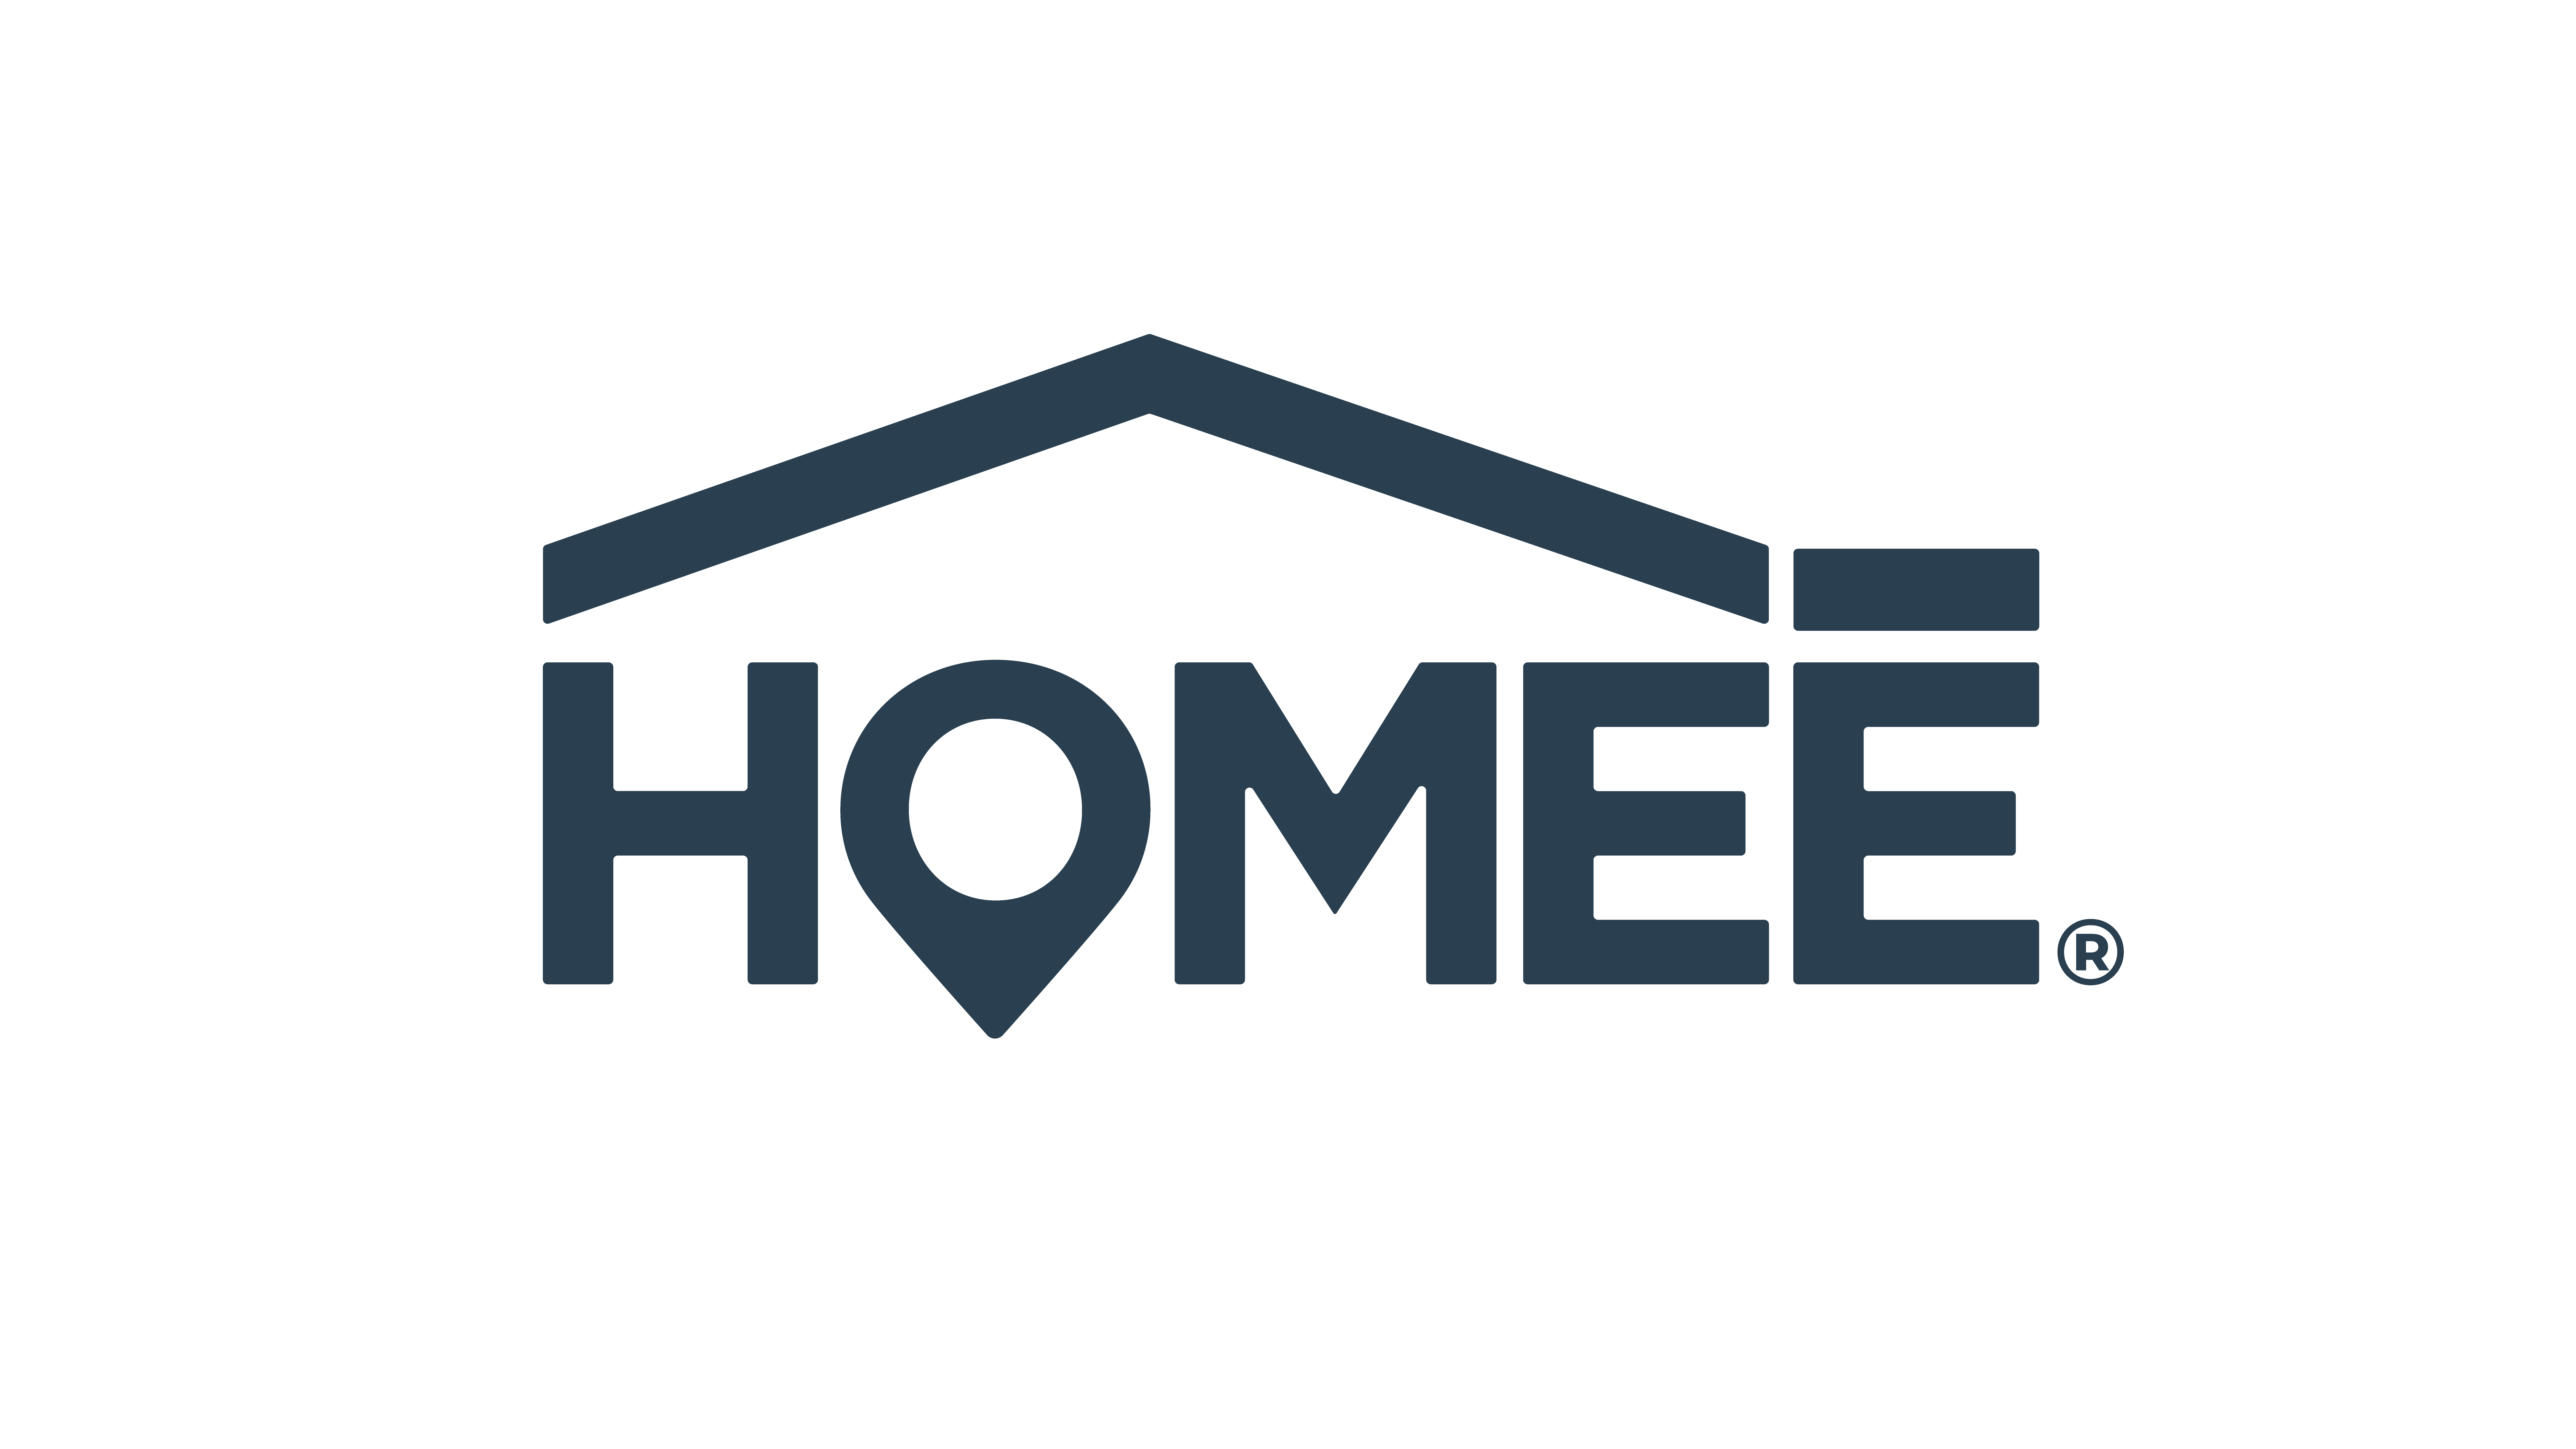 HOMEE Ranked One of America's Best Startup Employers by Forbes